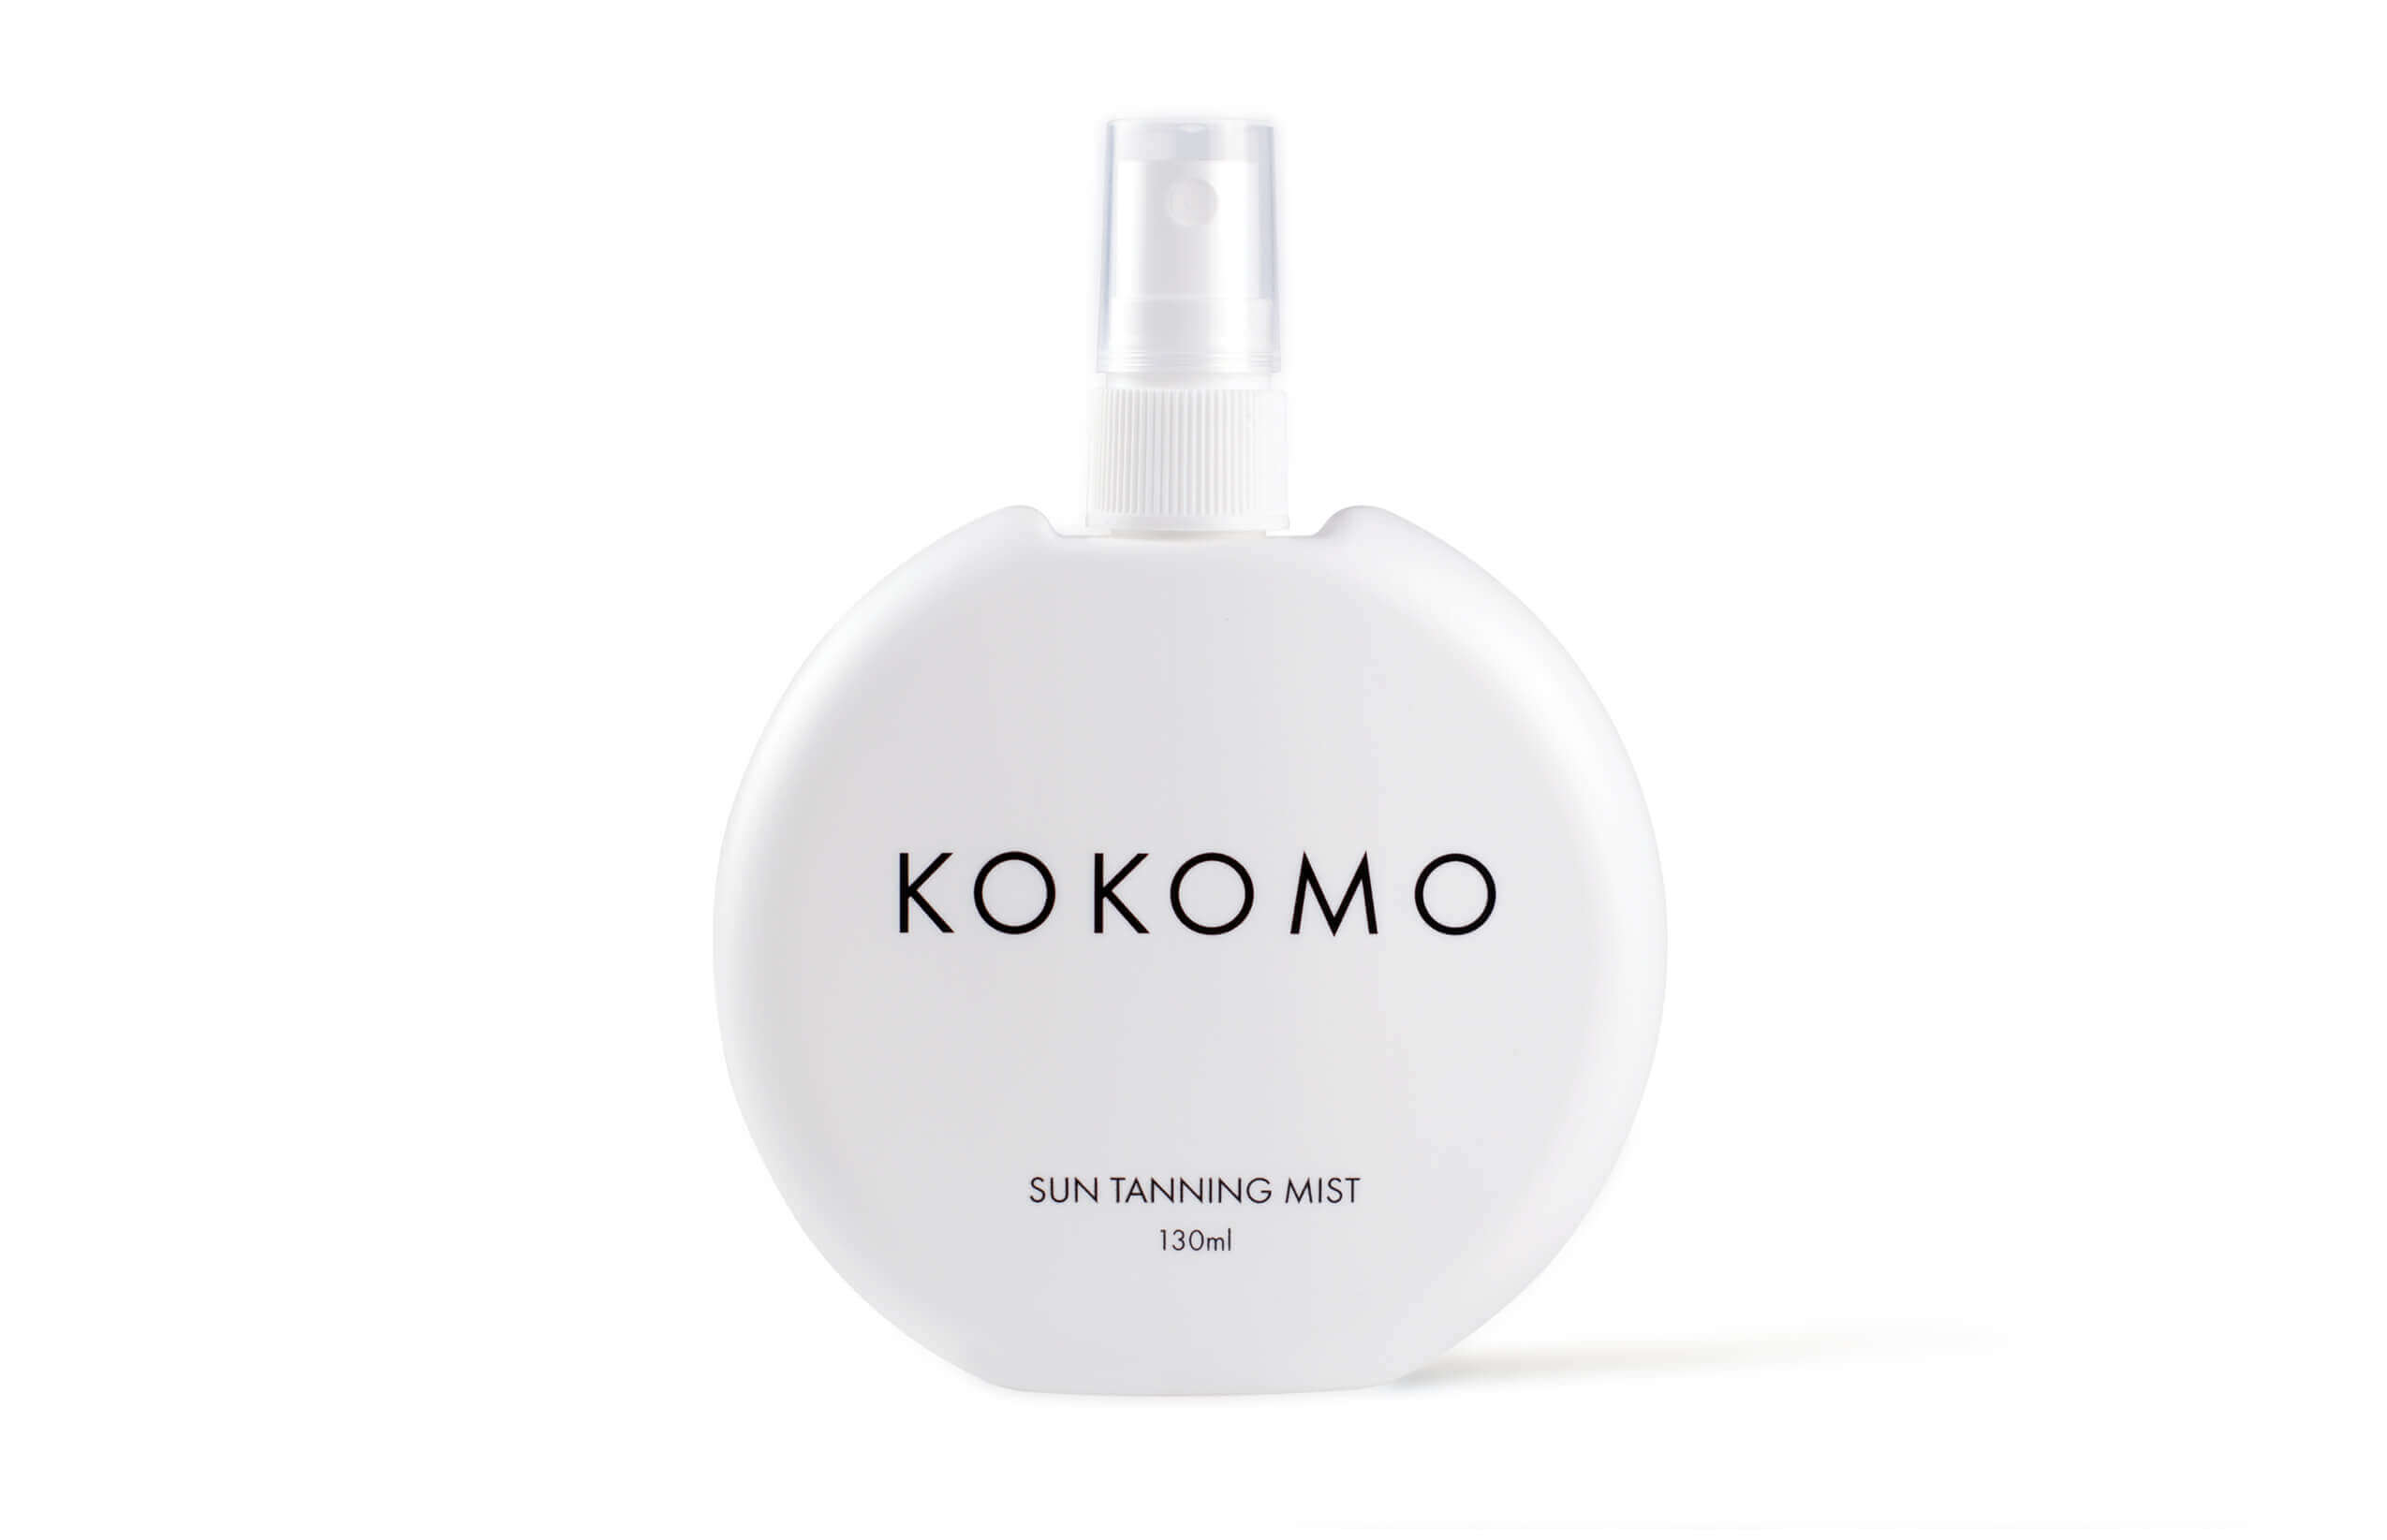 Icon Graphic Design - Label and packaging design Adelaide image of a Kokomo Sun Tanning Mist bottle front on.